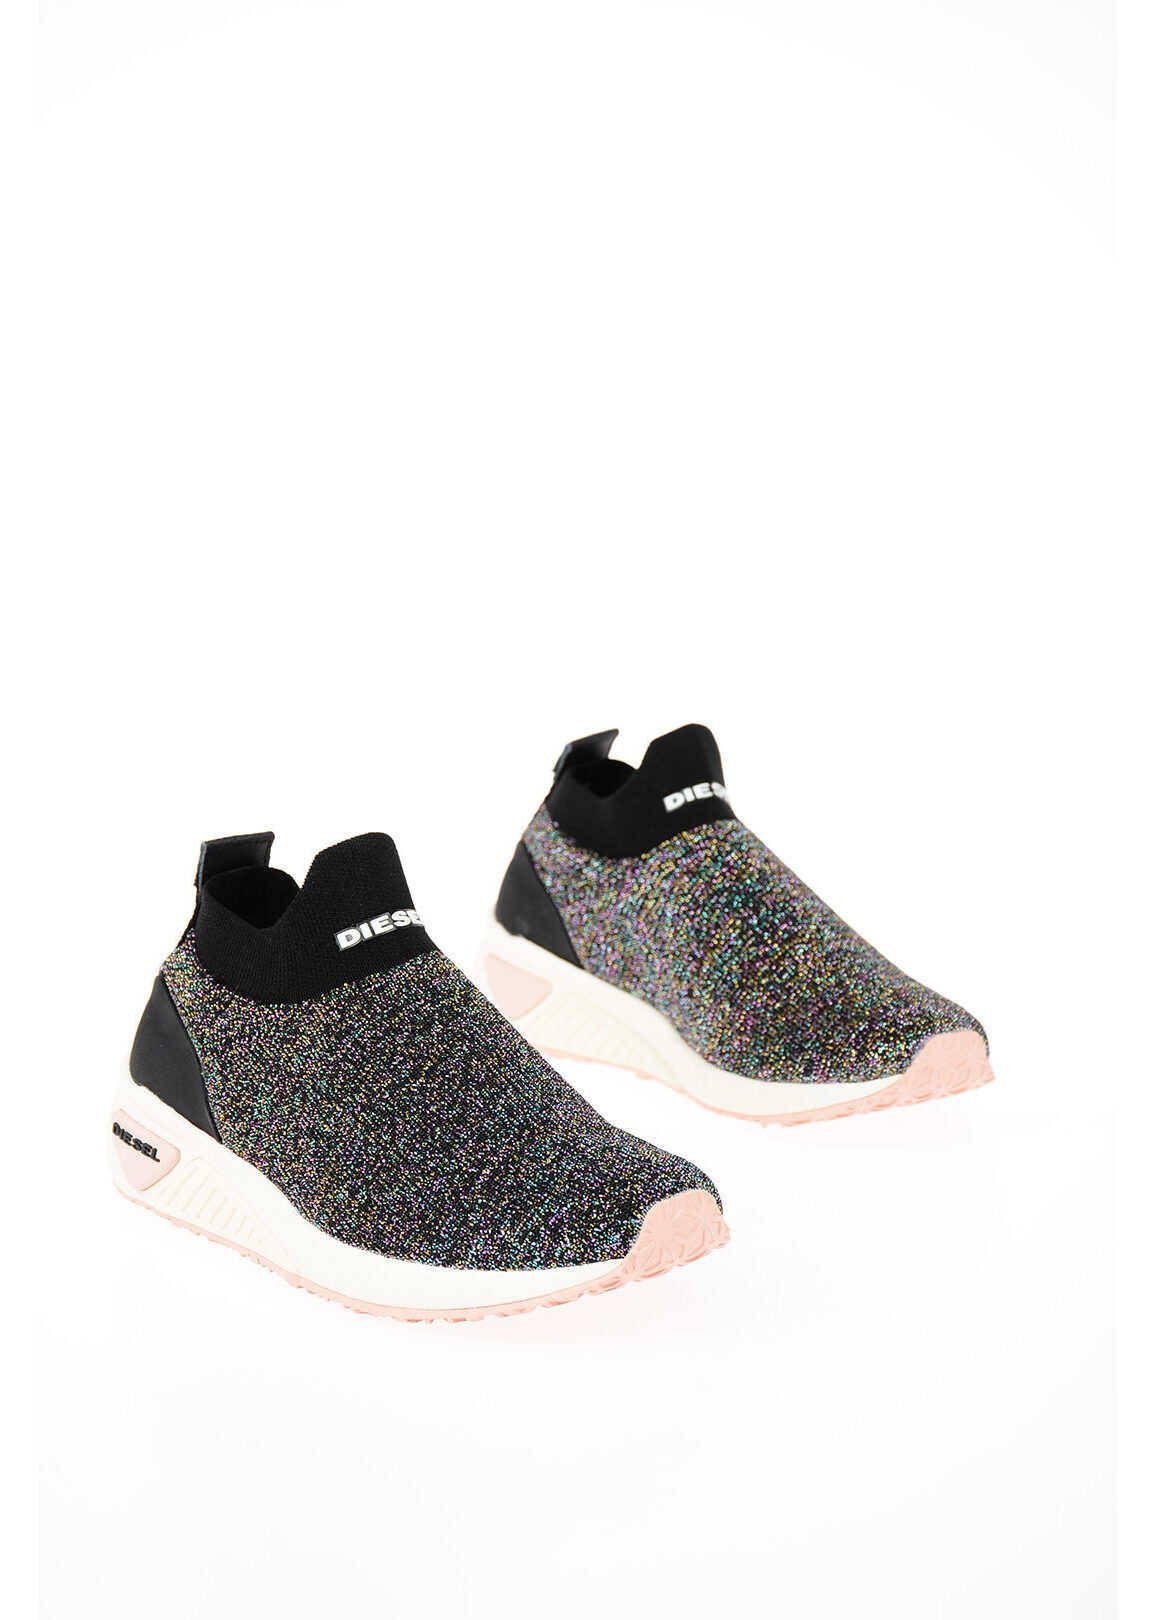 Diesel Fabric Glittered"SKB" S-KBY SO W Sneakers MULTICOLOR